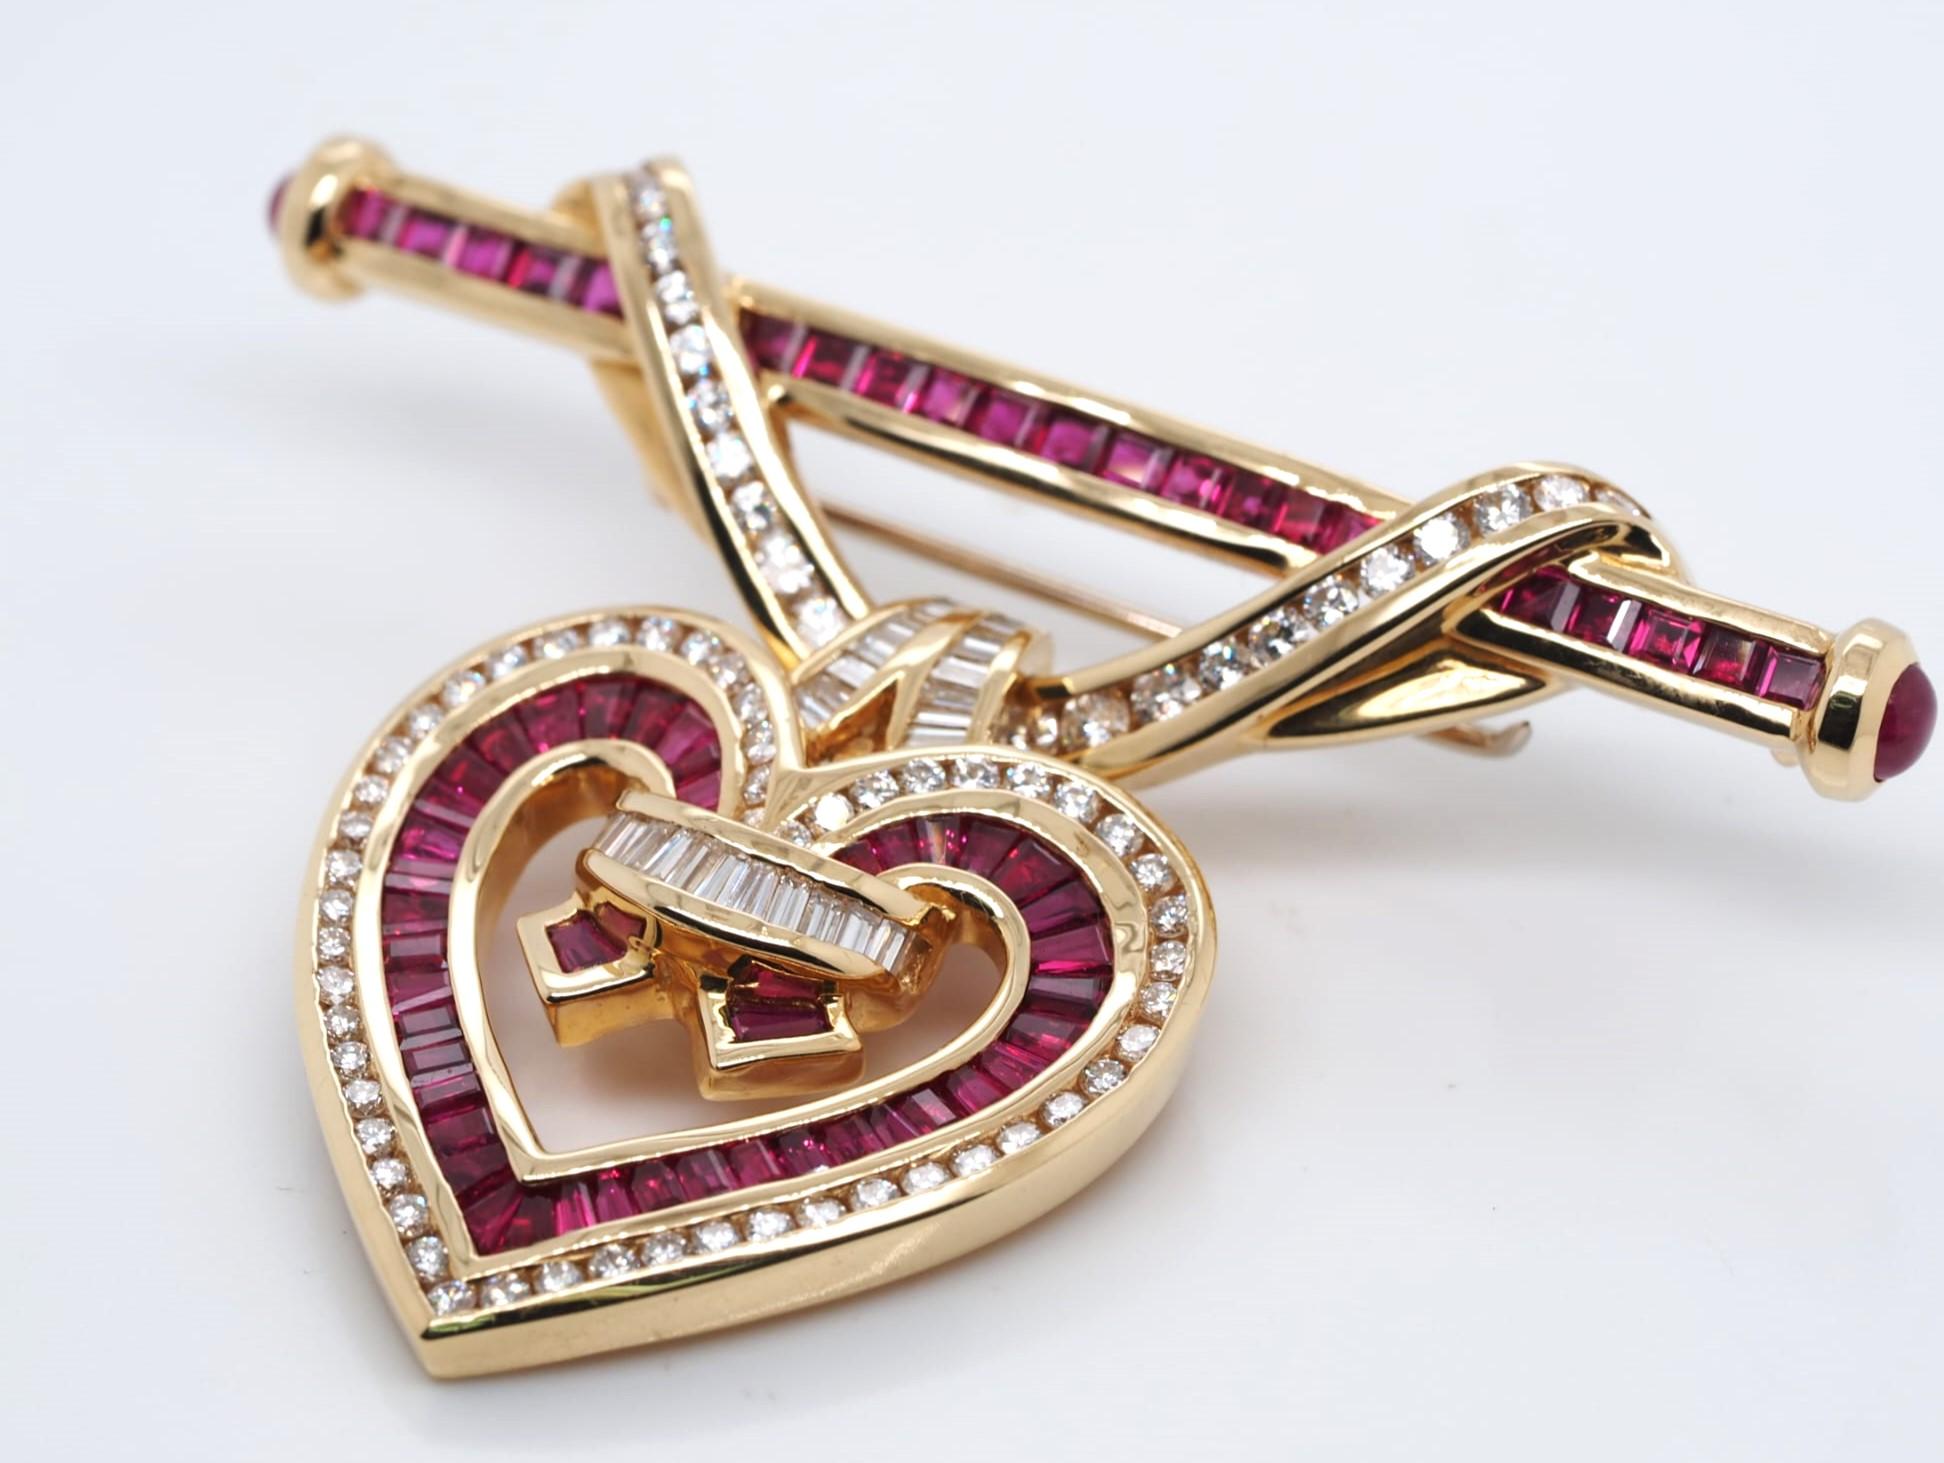 A stunning piece of fine jewelry, this Charles Krypell brooch pin is crafted from 18KT yellow gold and features a heart-shaped natural ruby stone measuring 3.2 carats. The ruby is surrounded by 2.67 carats of brilliant white diamonds, all set in a